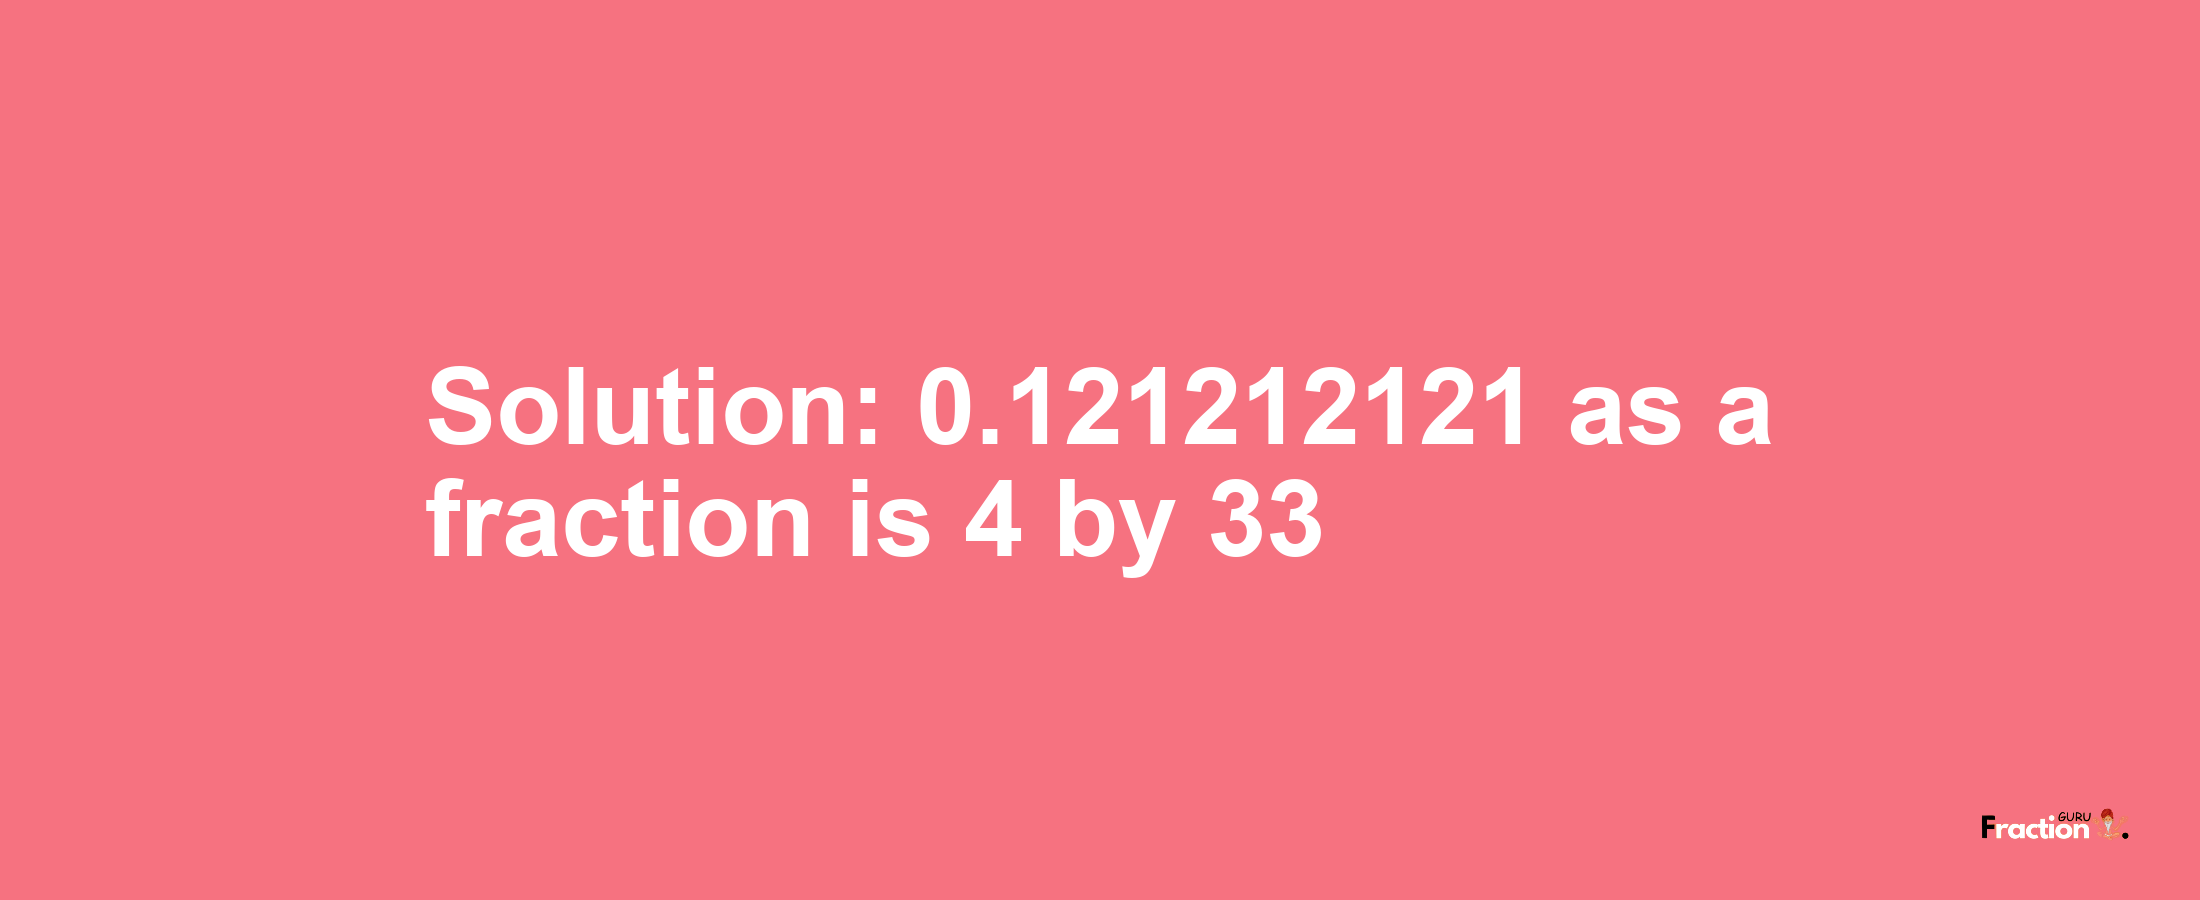 Solution:0.121212121 as a fraction is 4/33